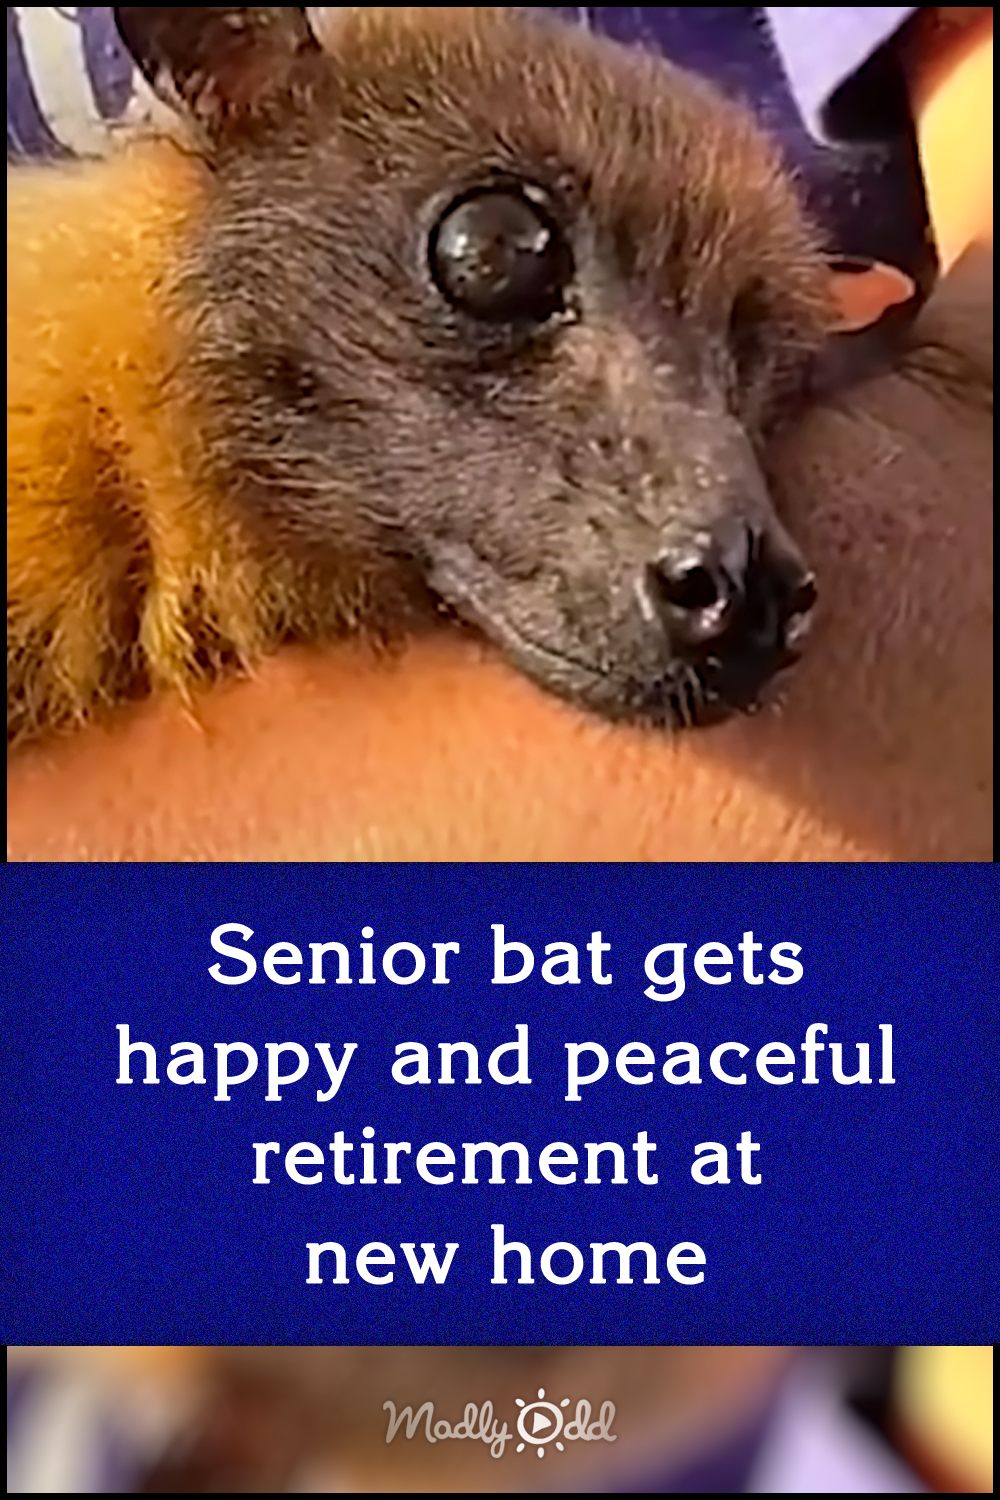 Senior bat gets happy and peaceful retirement at new home